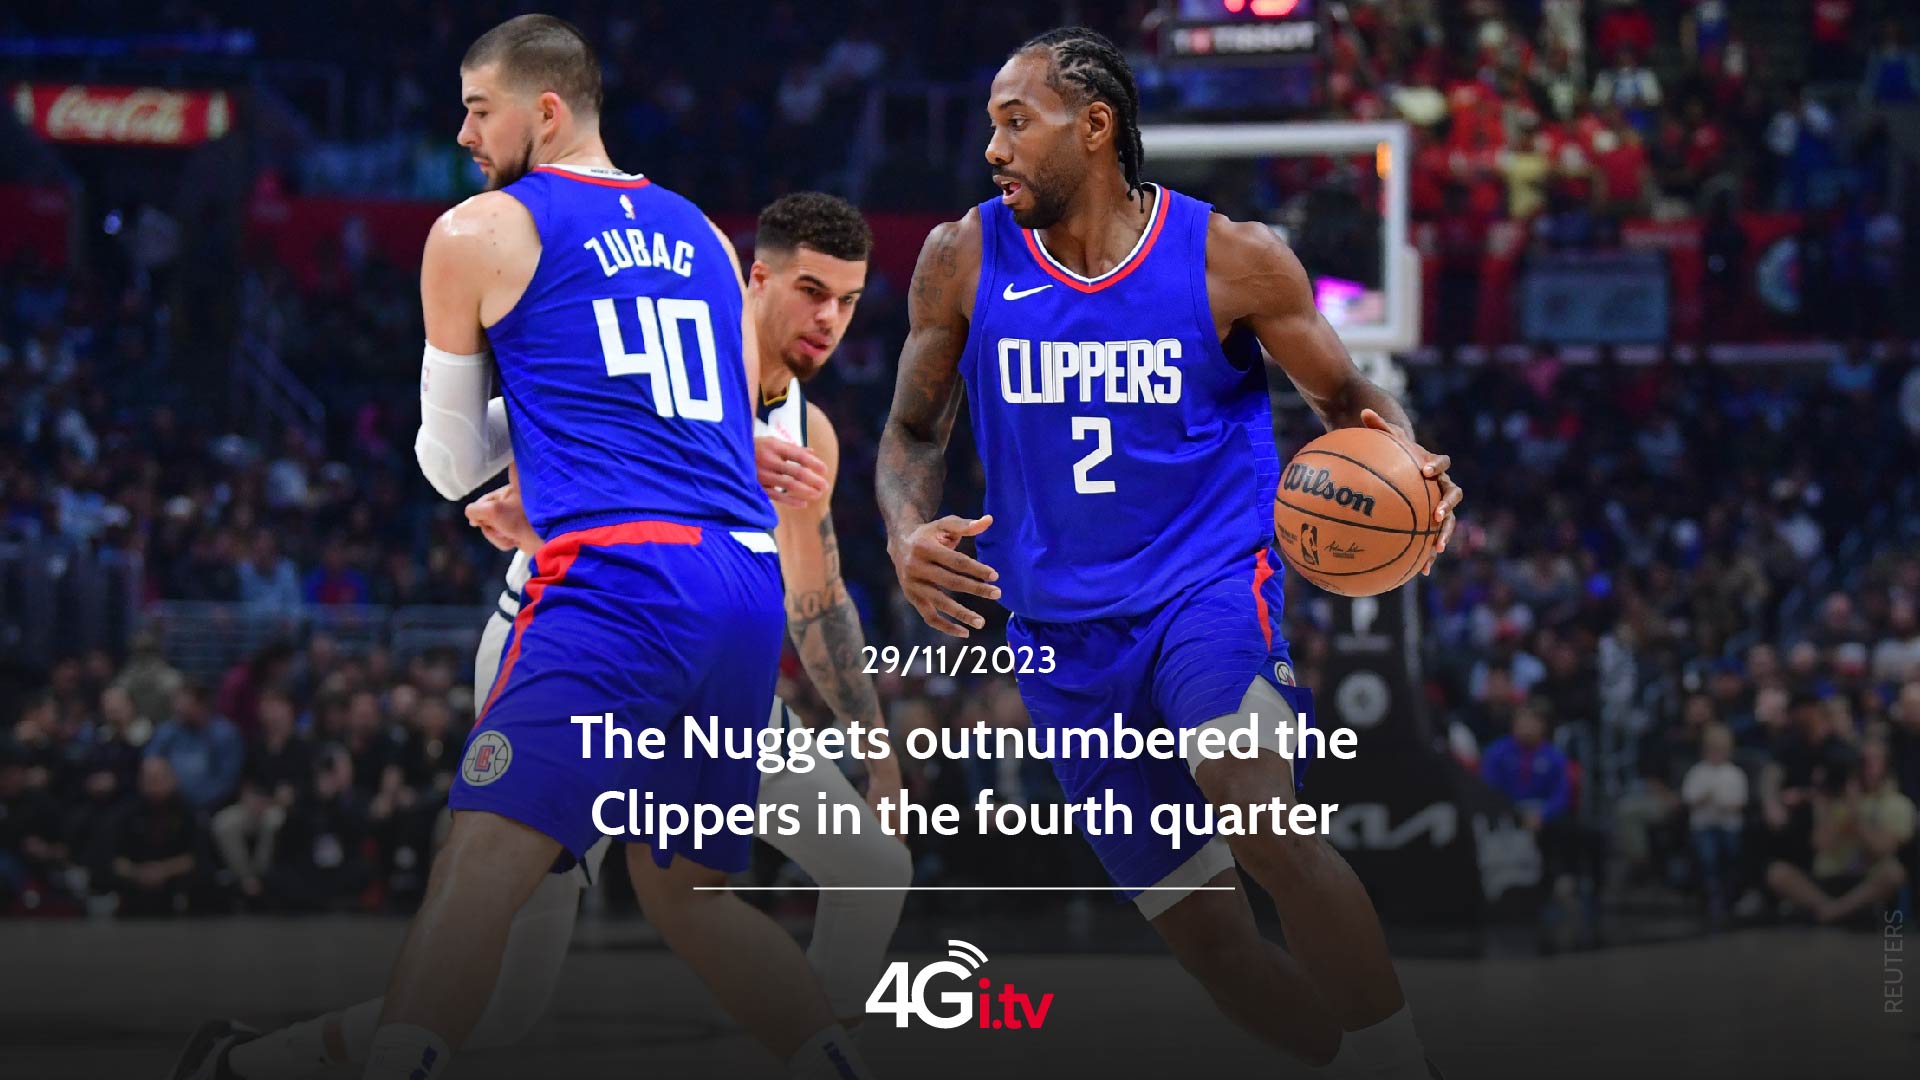 Lee más sobre el artículo The Nuggets outnumbered the Clippers in the fourth quarter